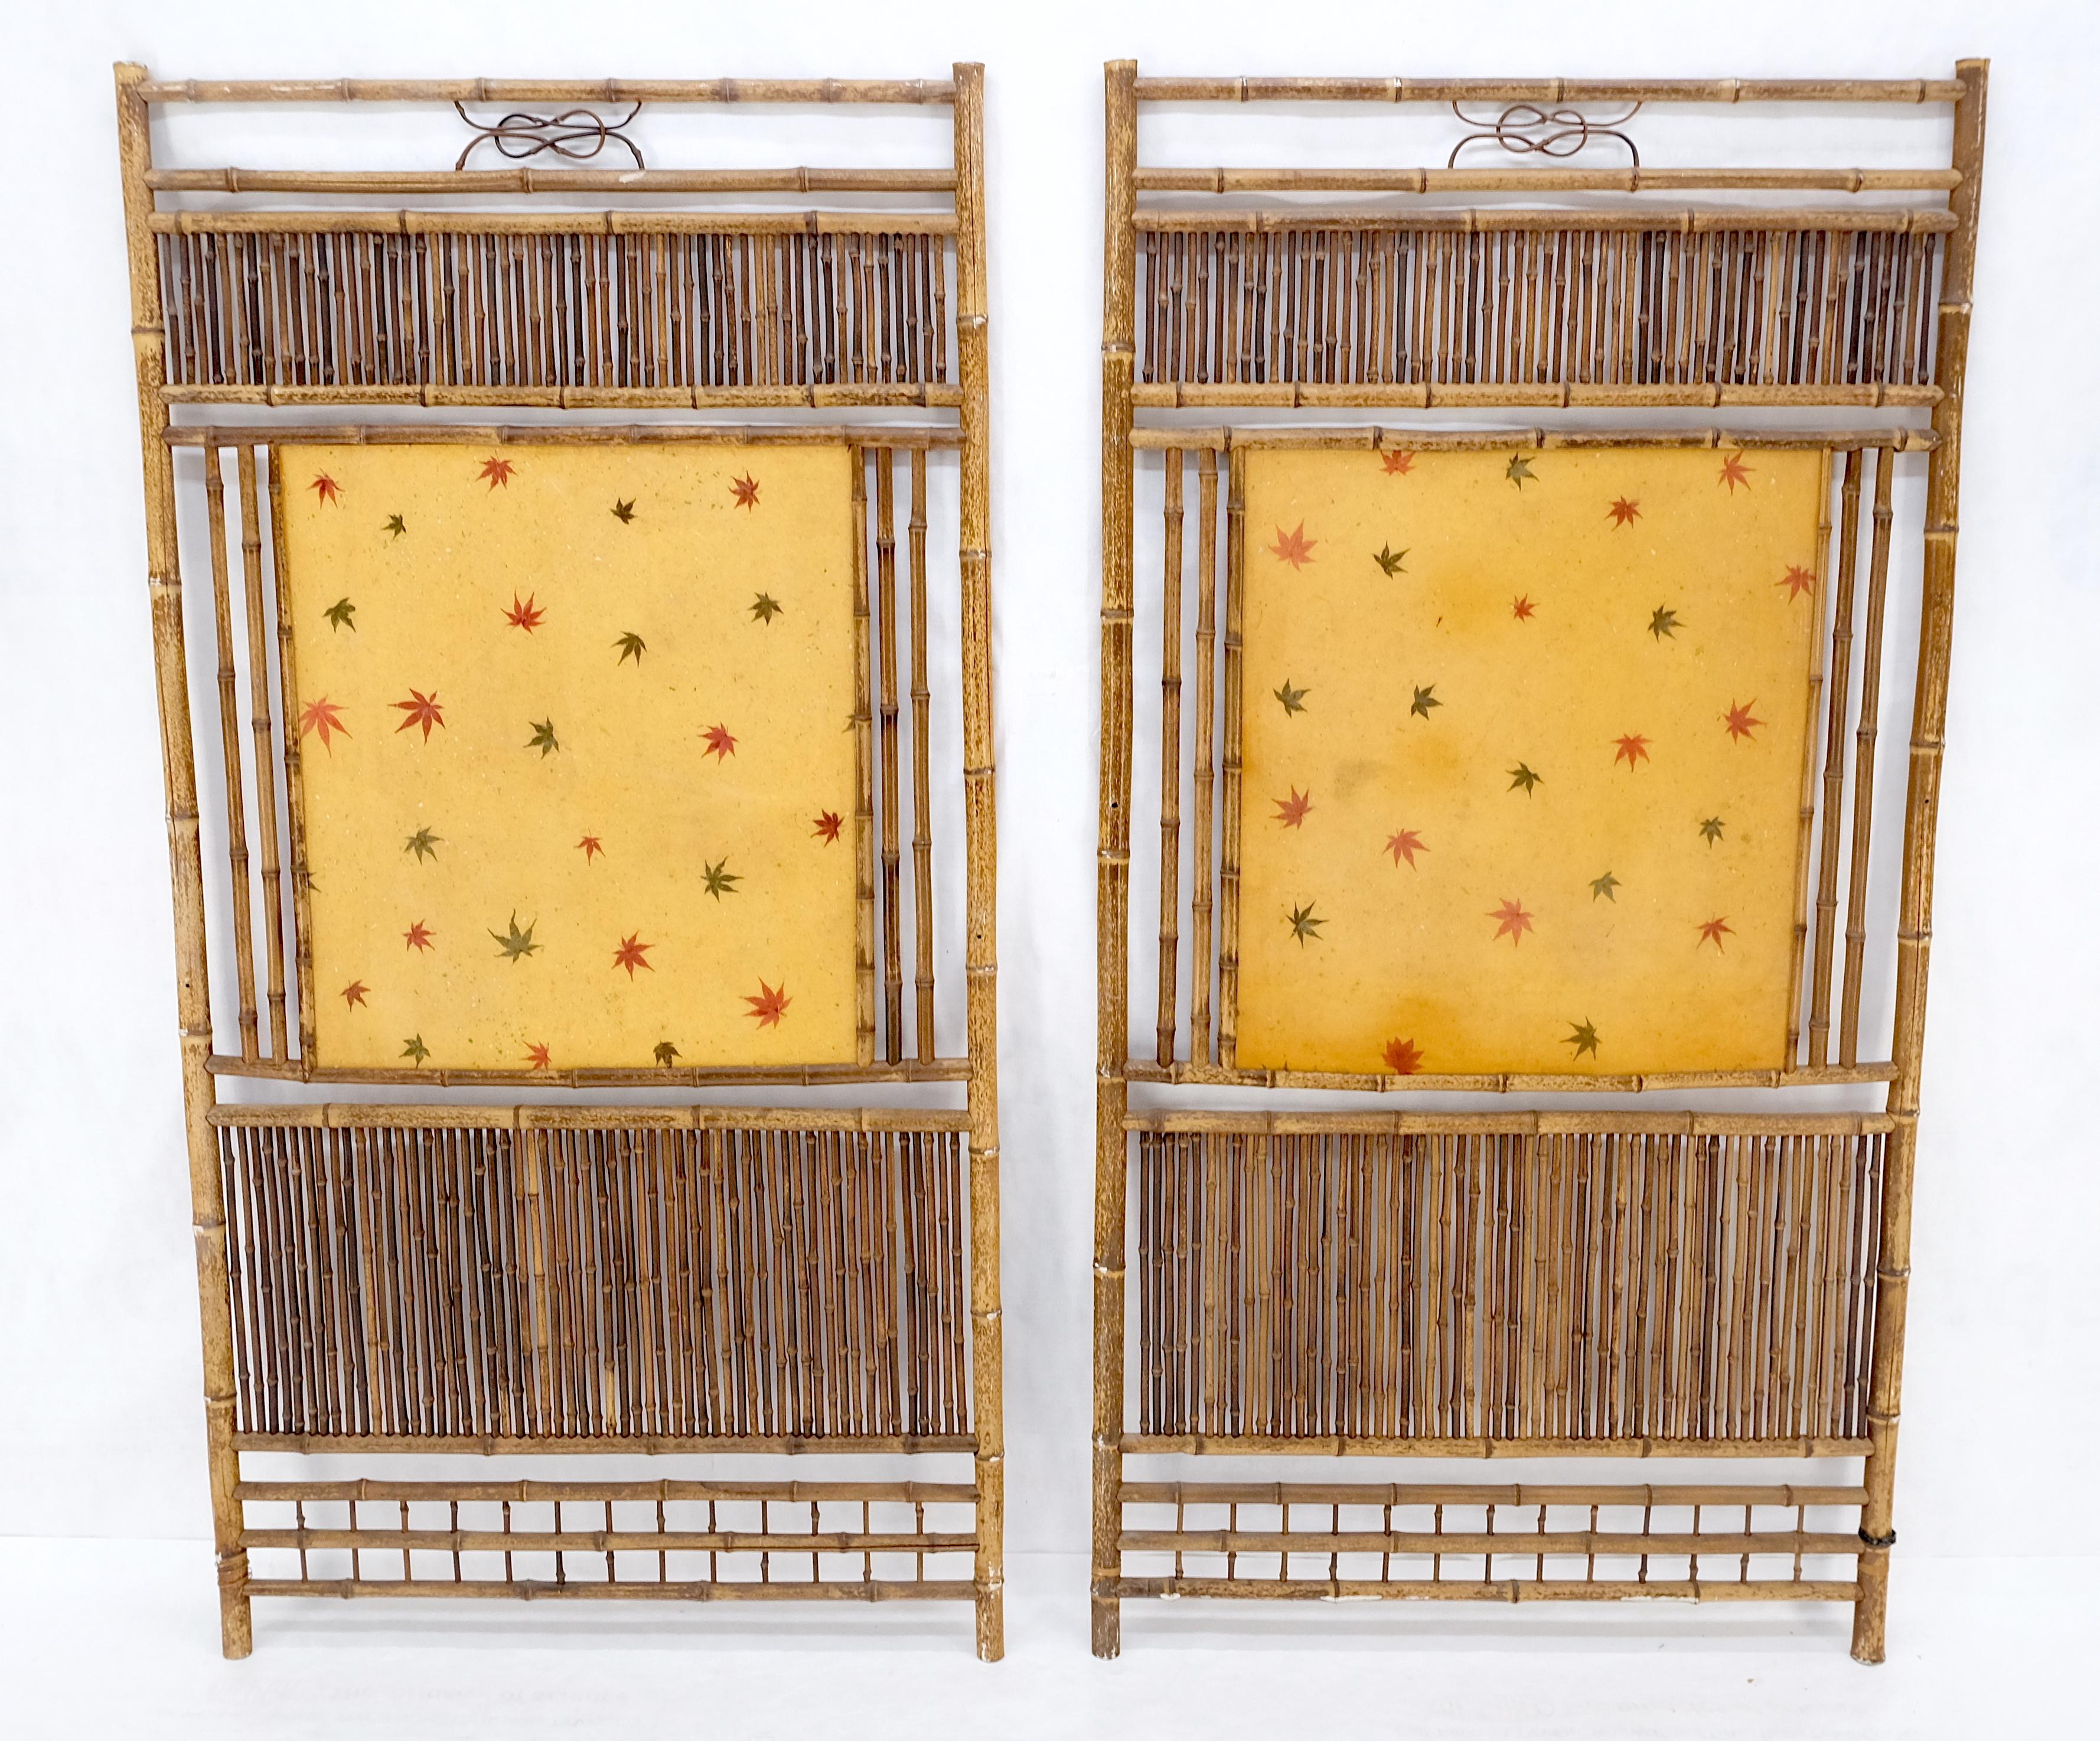 Pair of Japanese Modern Bamboo Room Dividers Screens Decorative Panels Wall Art For Sale 1